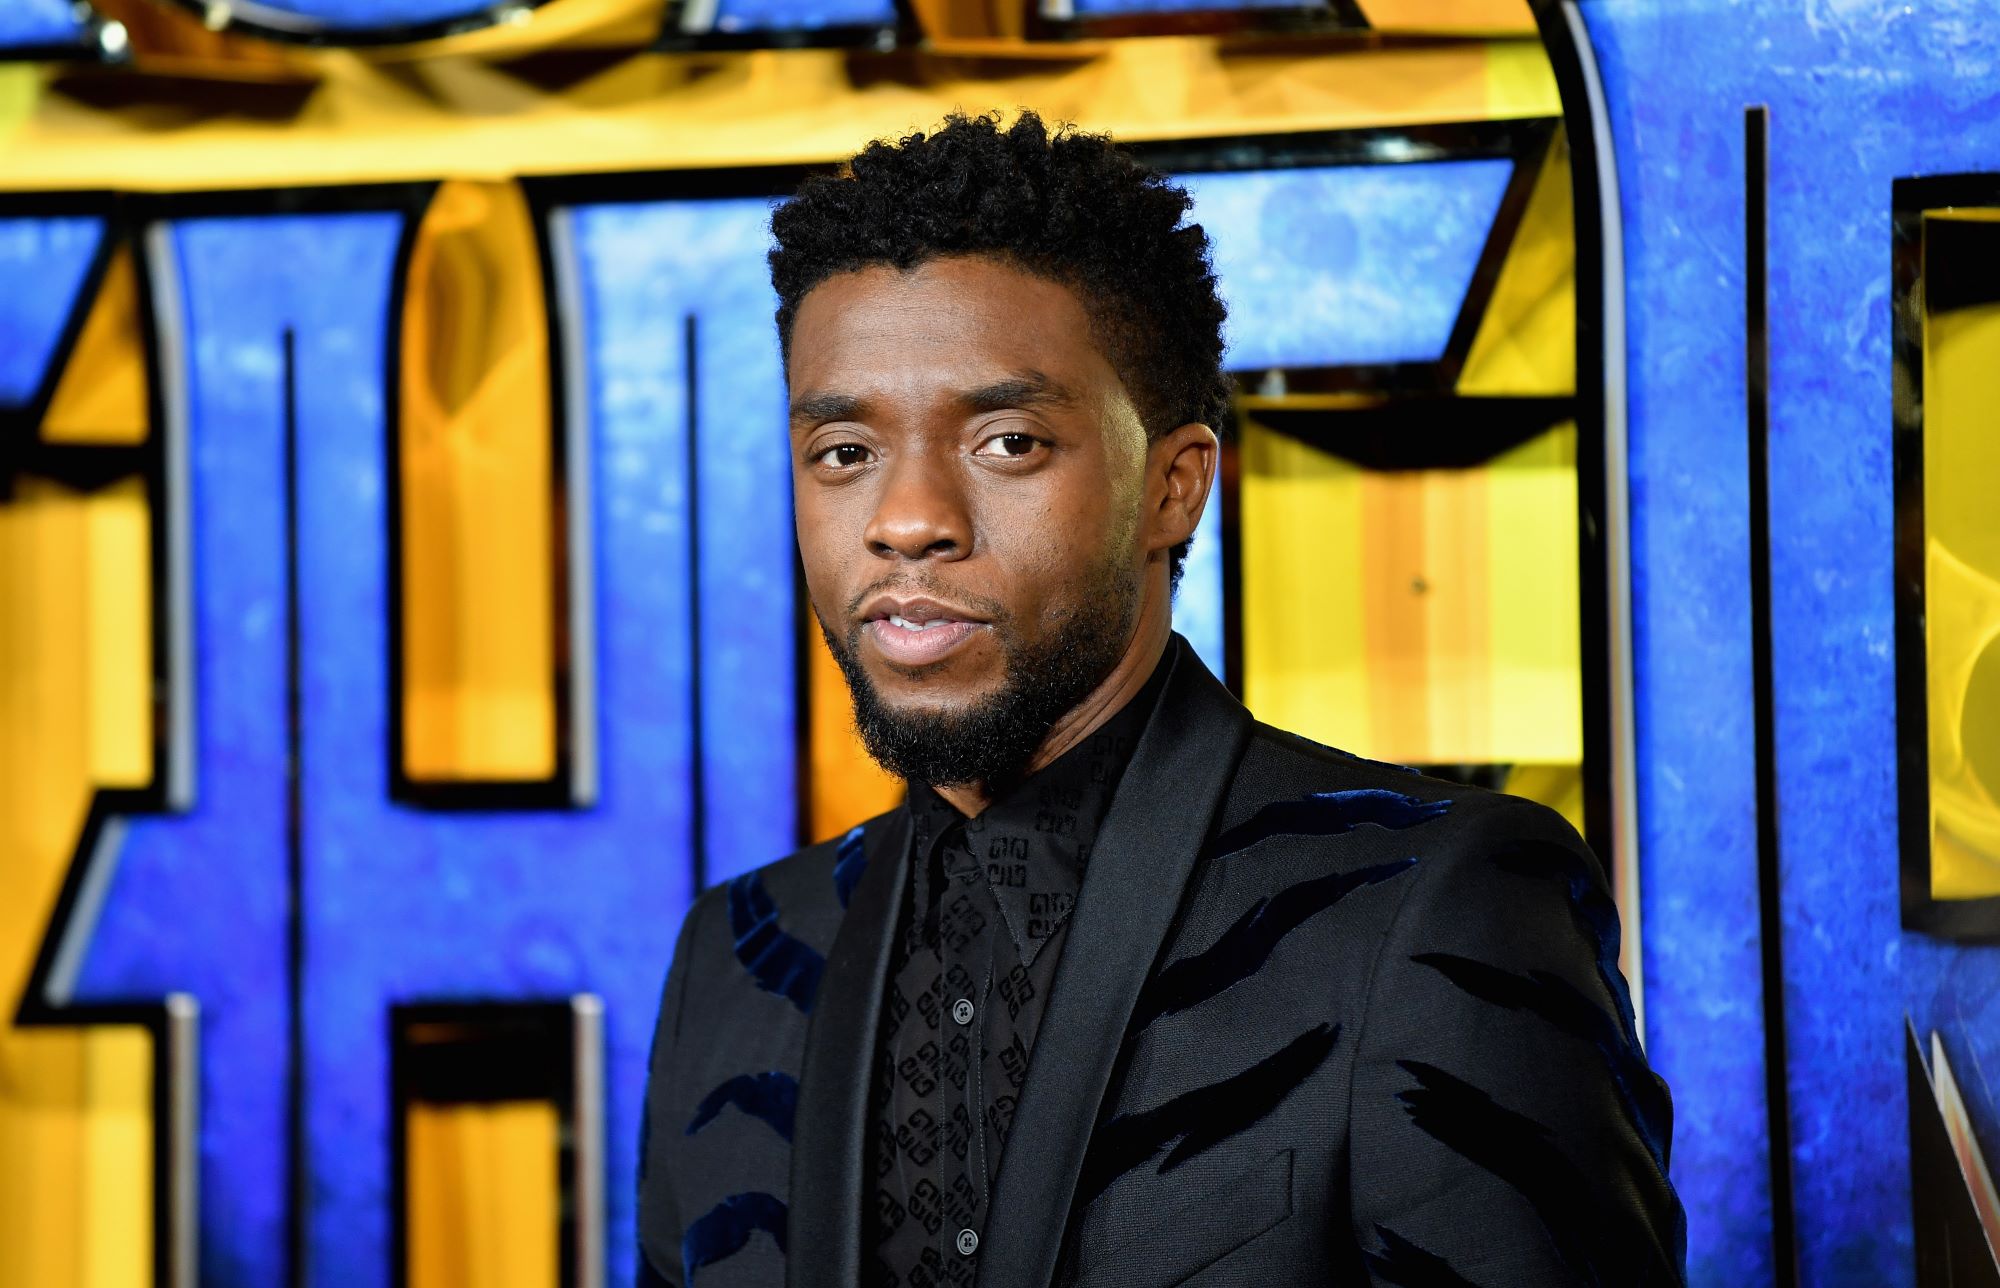 'Black Panther' star Chadwich Boseman wears a black suit over a black button-up shirt.